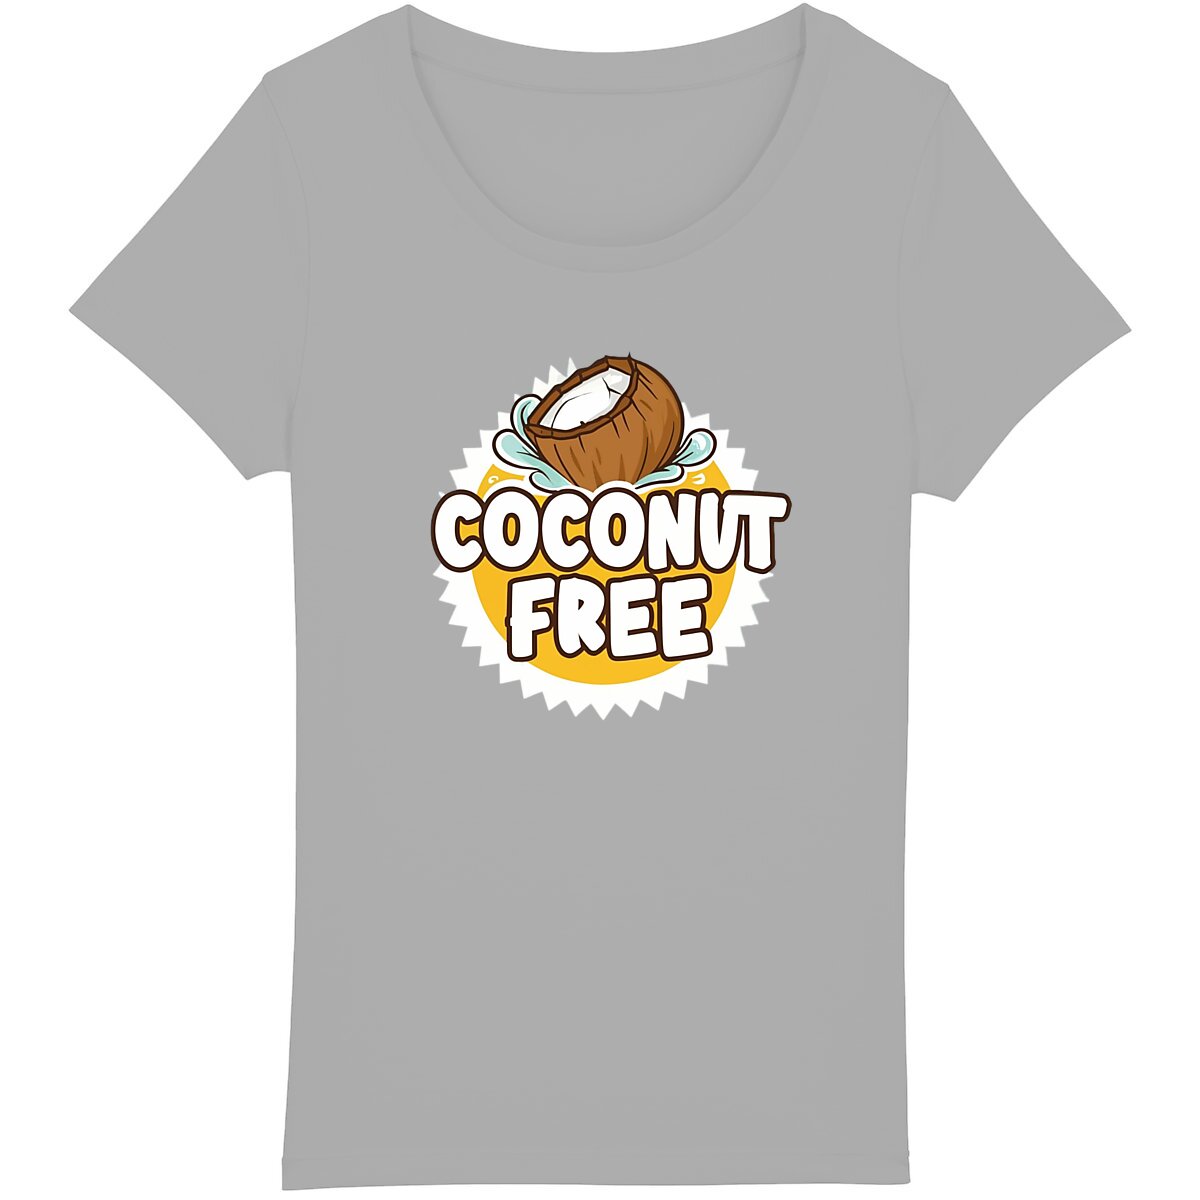 Coconut Free Organic Cotton Graphic Tee | Hypoallergenic - Allergy Friendly - Naturally Free